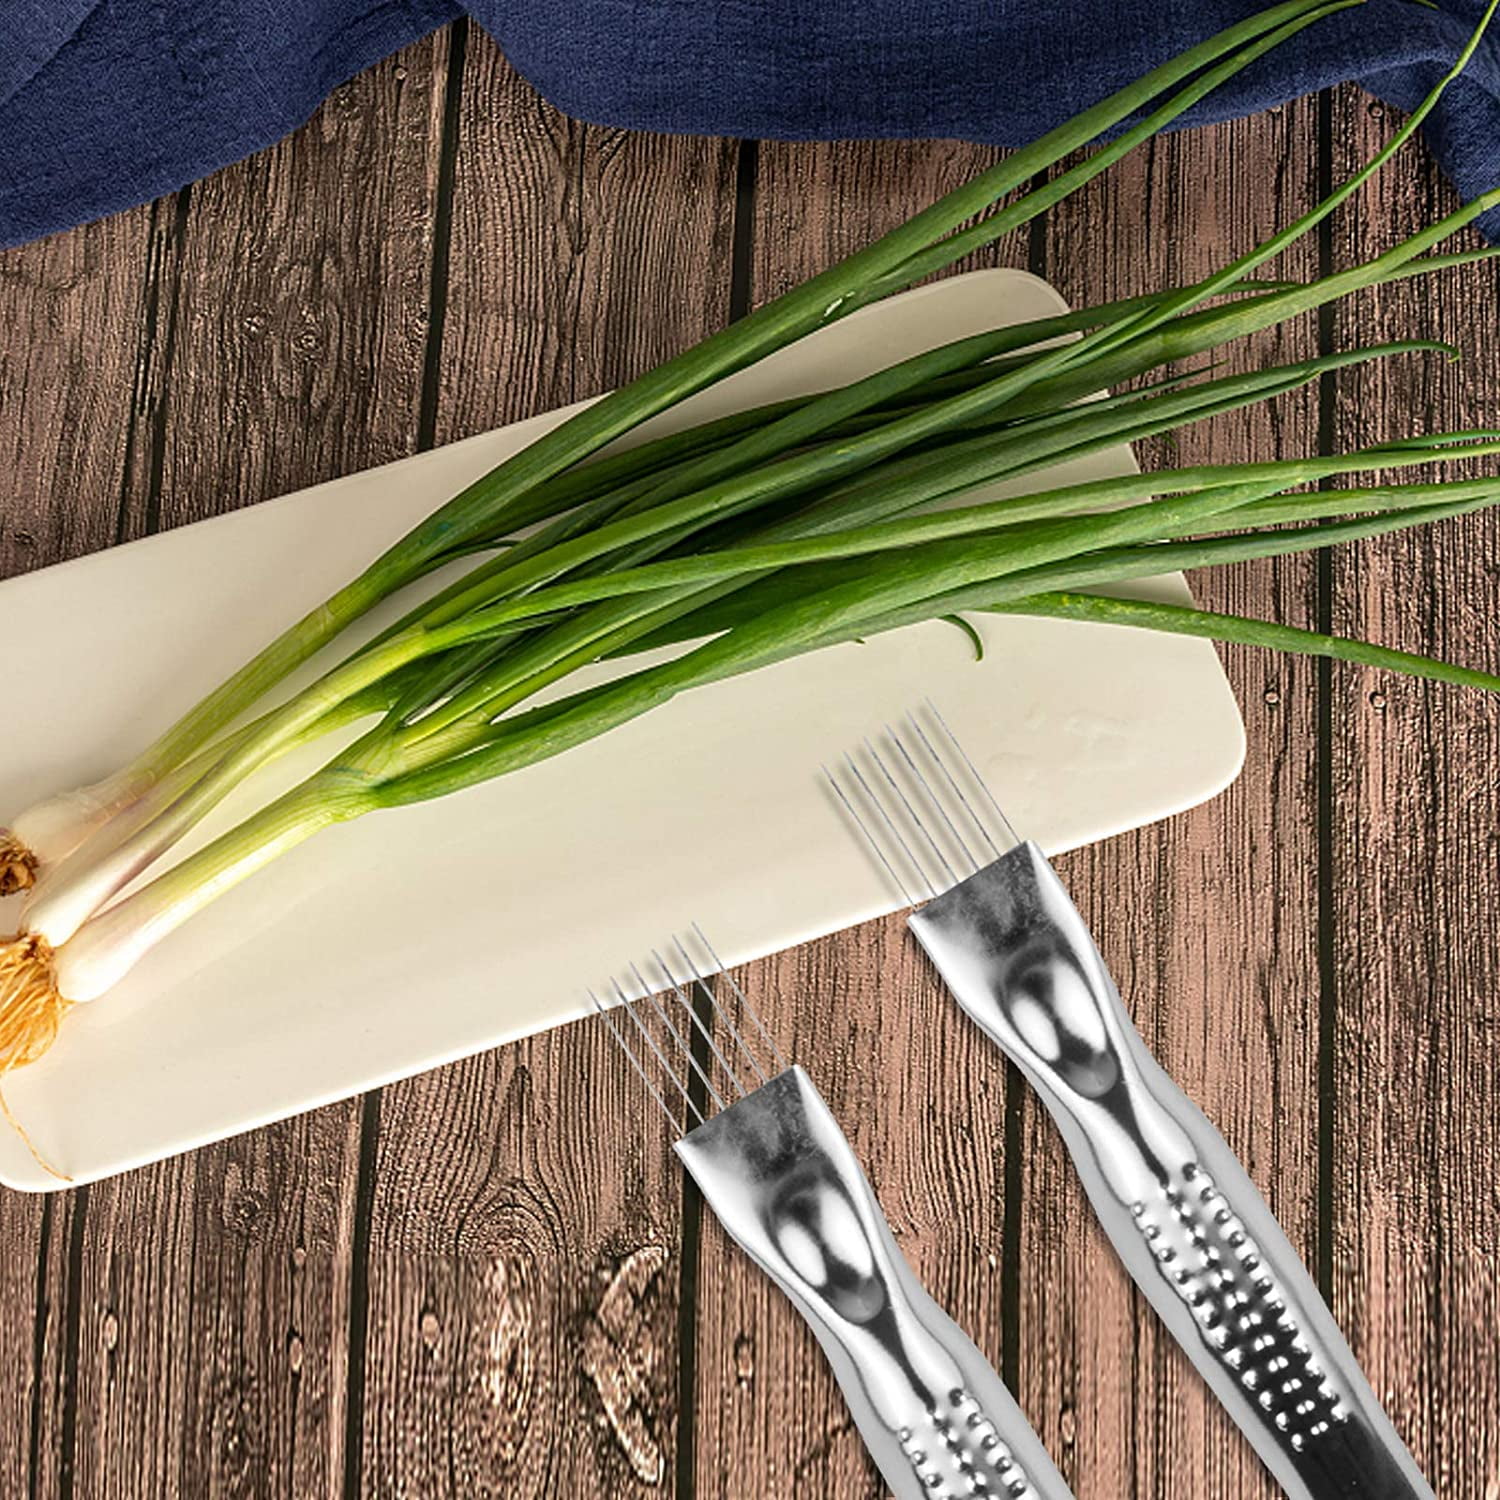 Shred Silk the Knife, Green Onion Shredder, Stainless Steel Onion Cutter  Scallion Slicer Garlic Cutter Onion Blossom Cutter with Curved Handle  Design